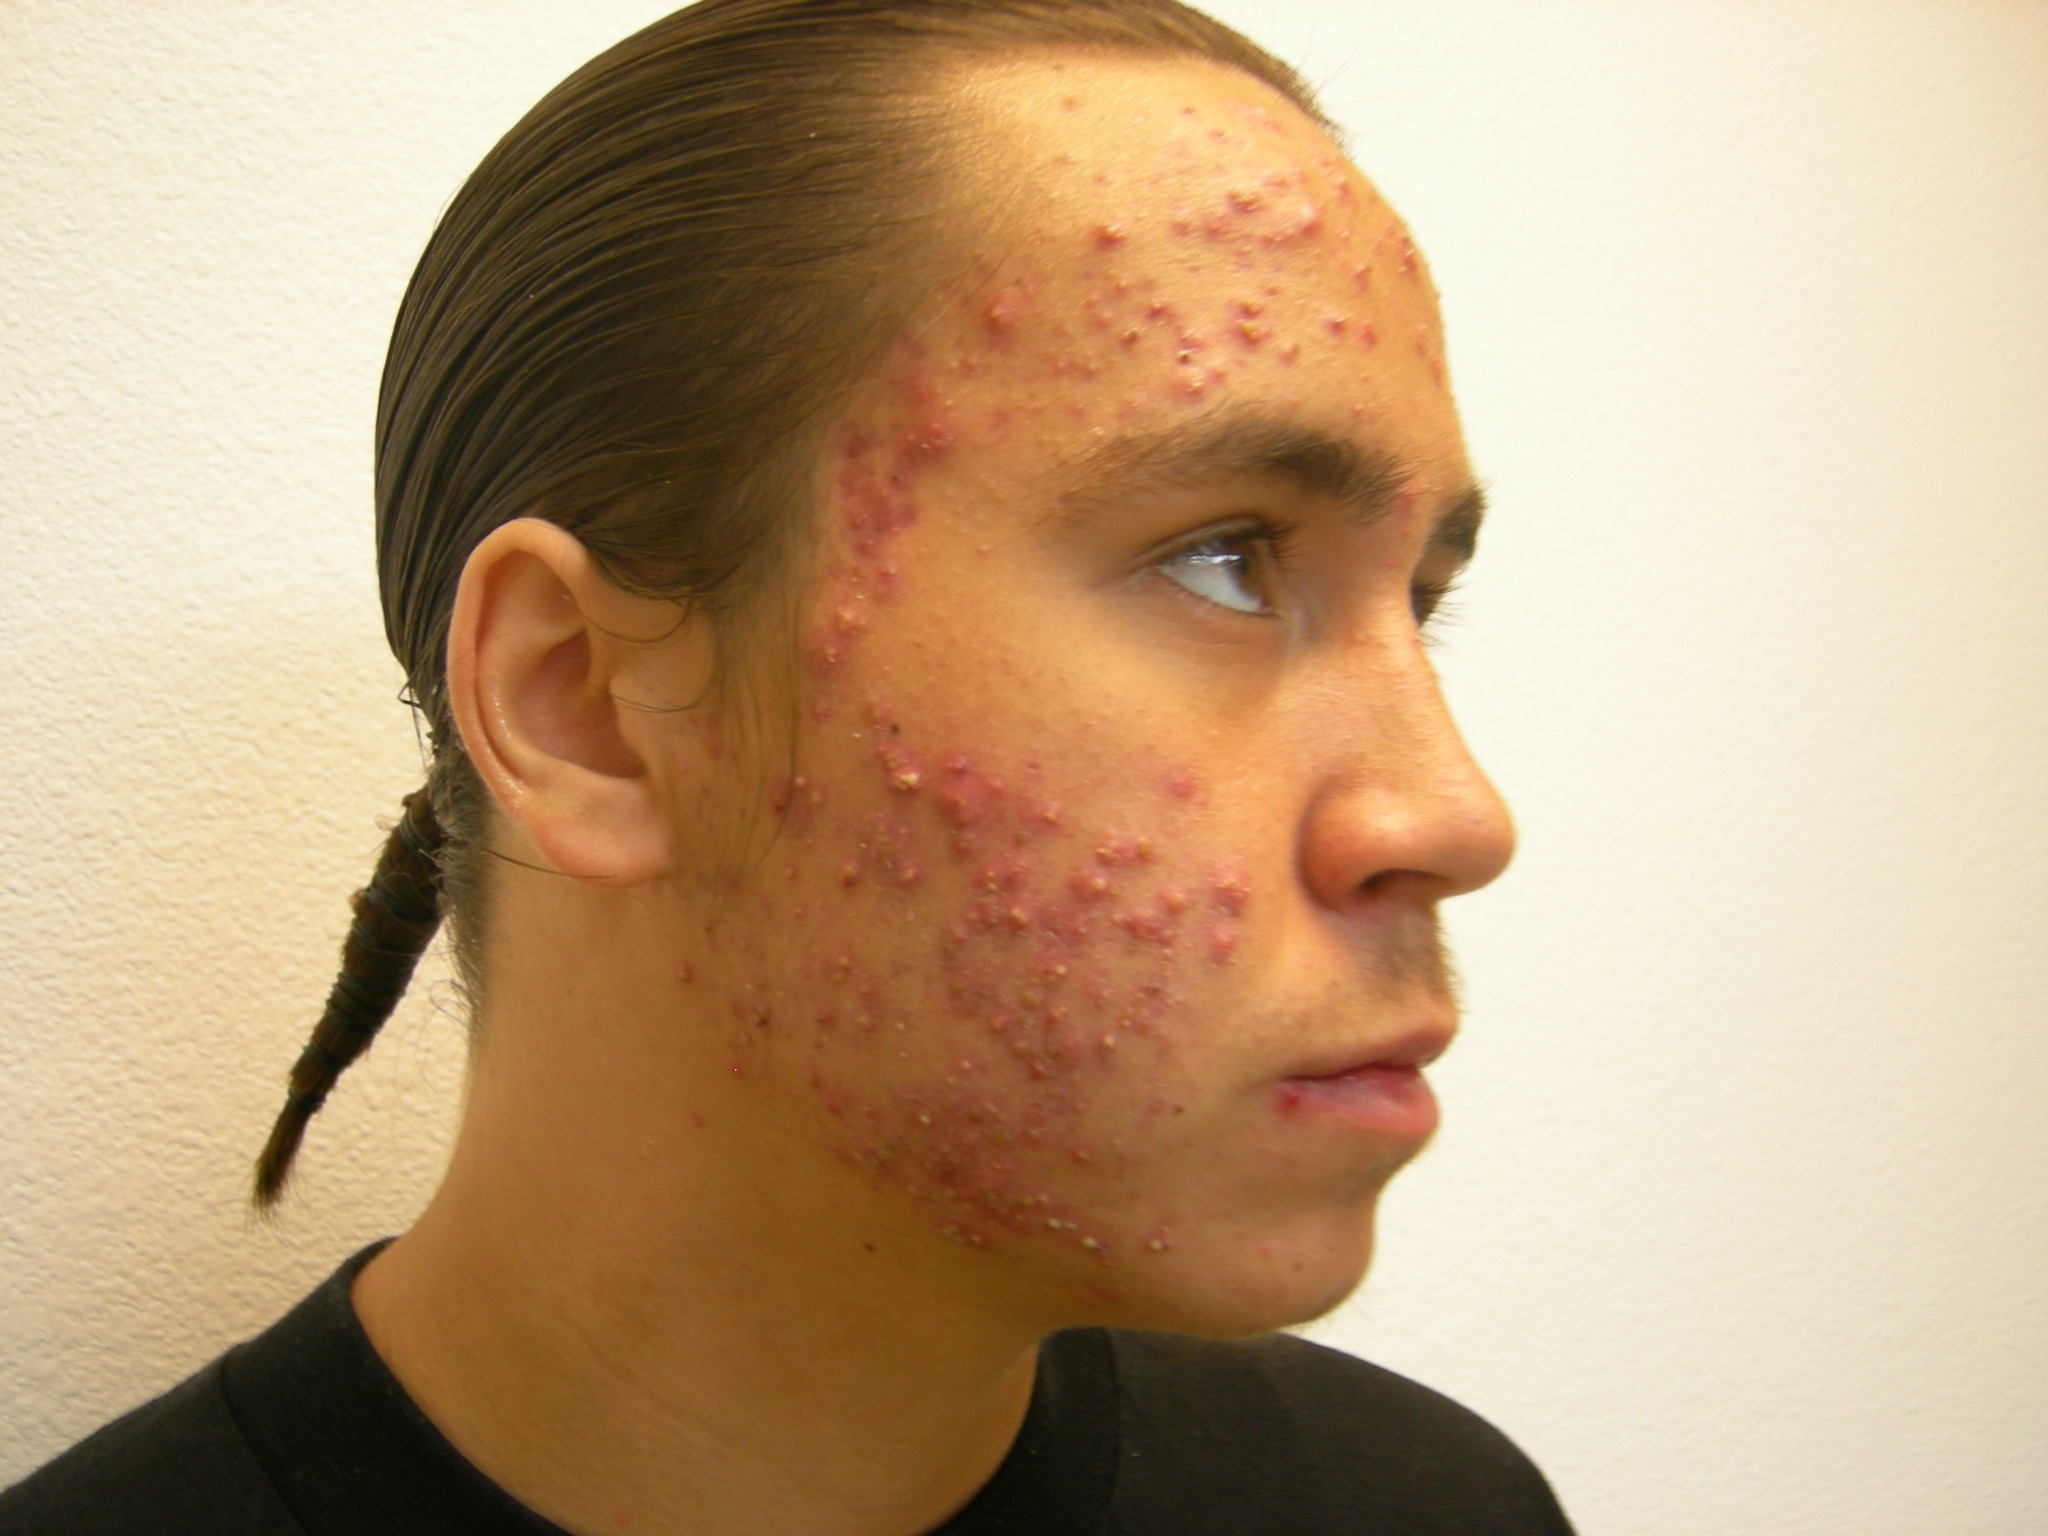 Before-Acne Scars and Scar Treatment